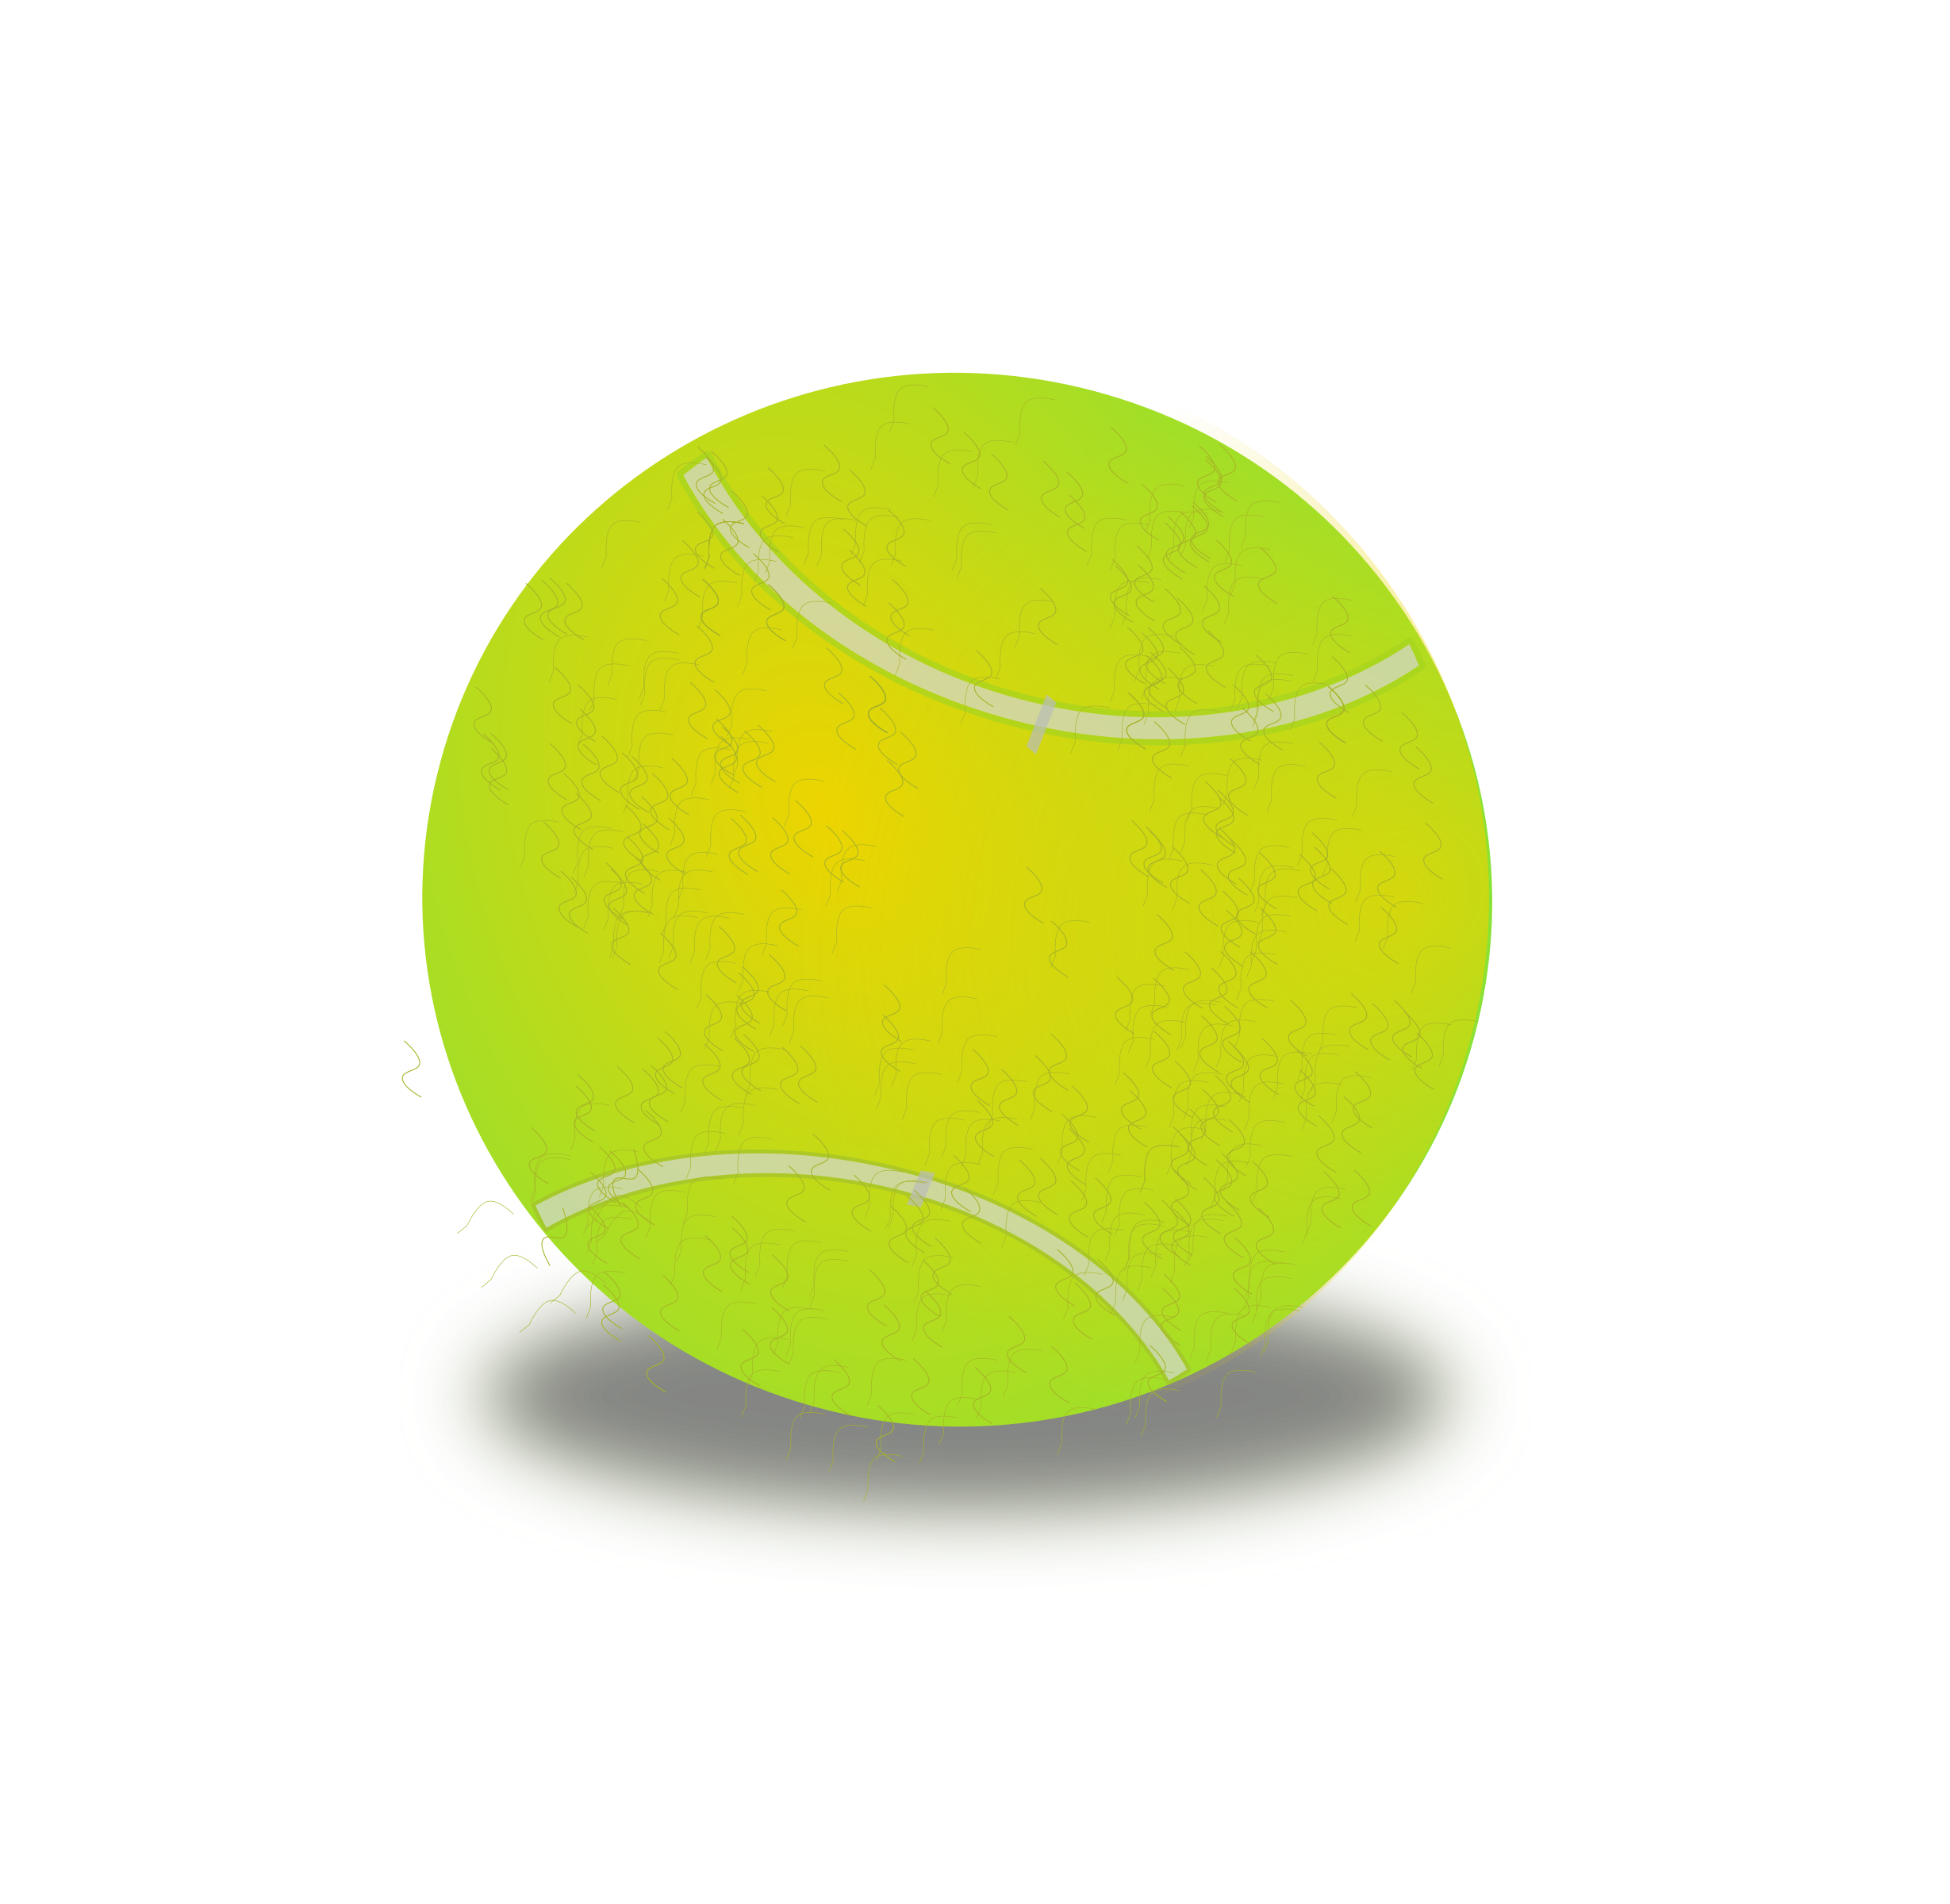 Small Tennis Ball Drawing : Tennis balls are fluorescent yellow at ...